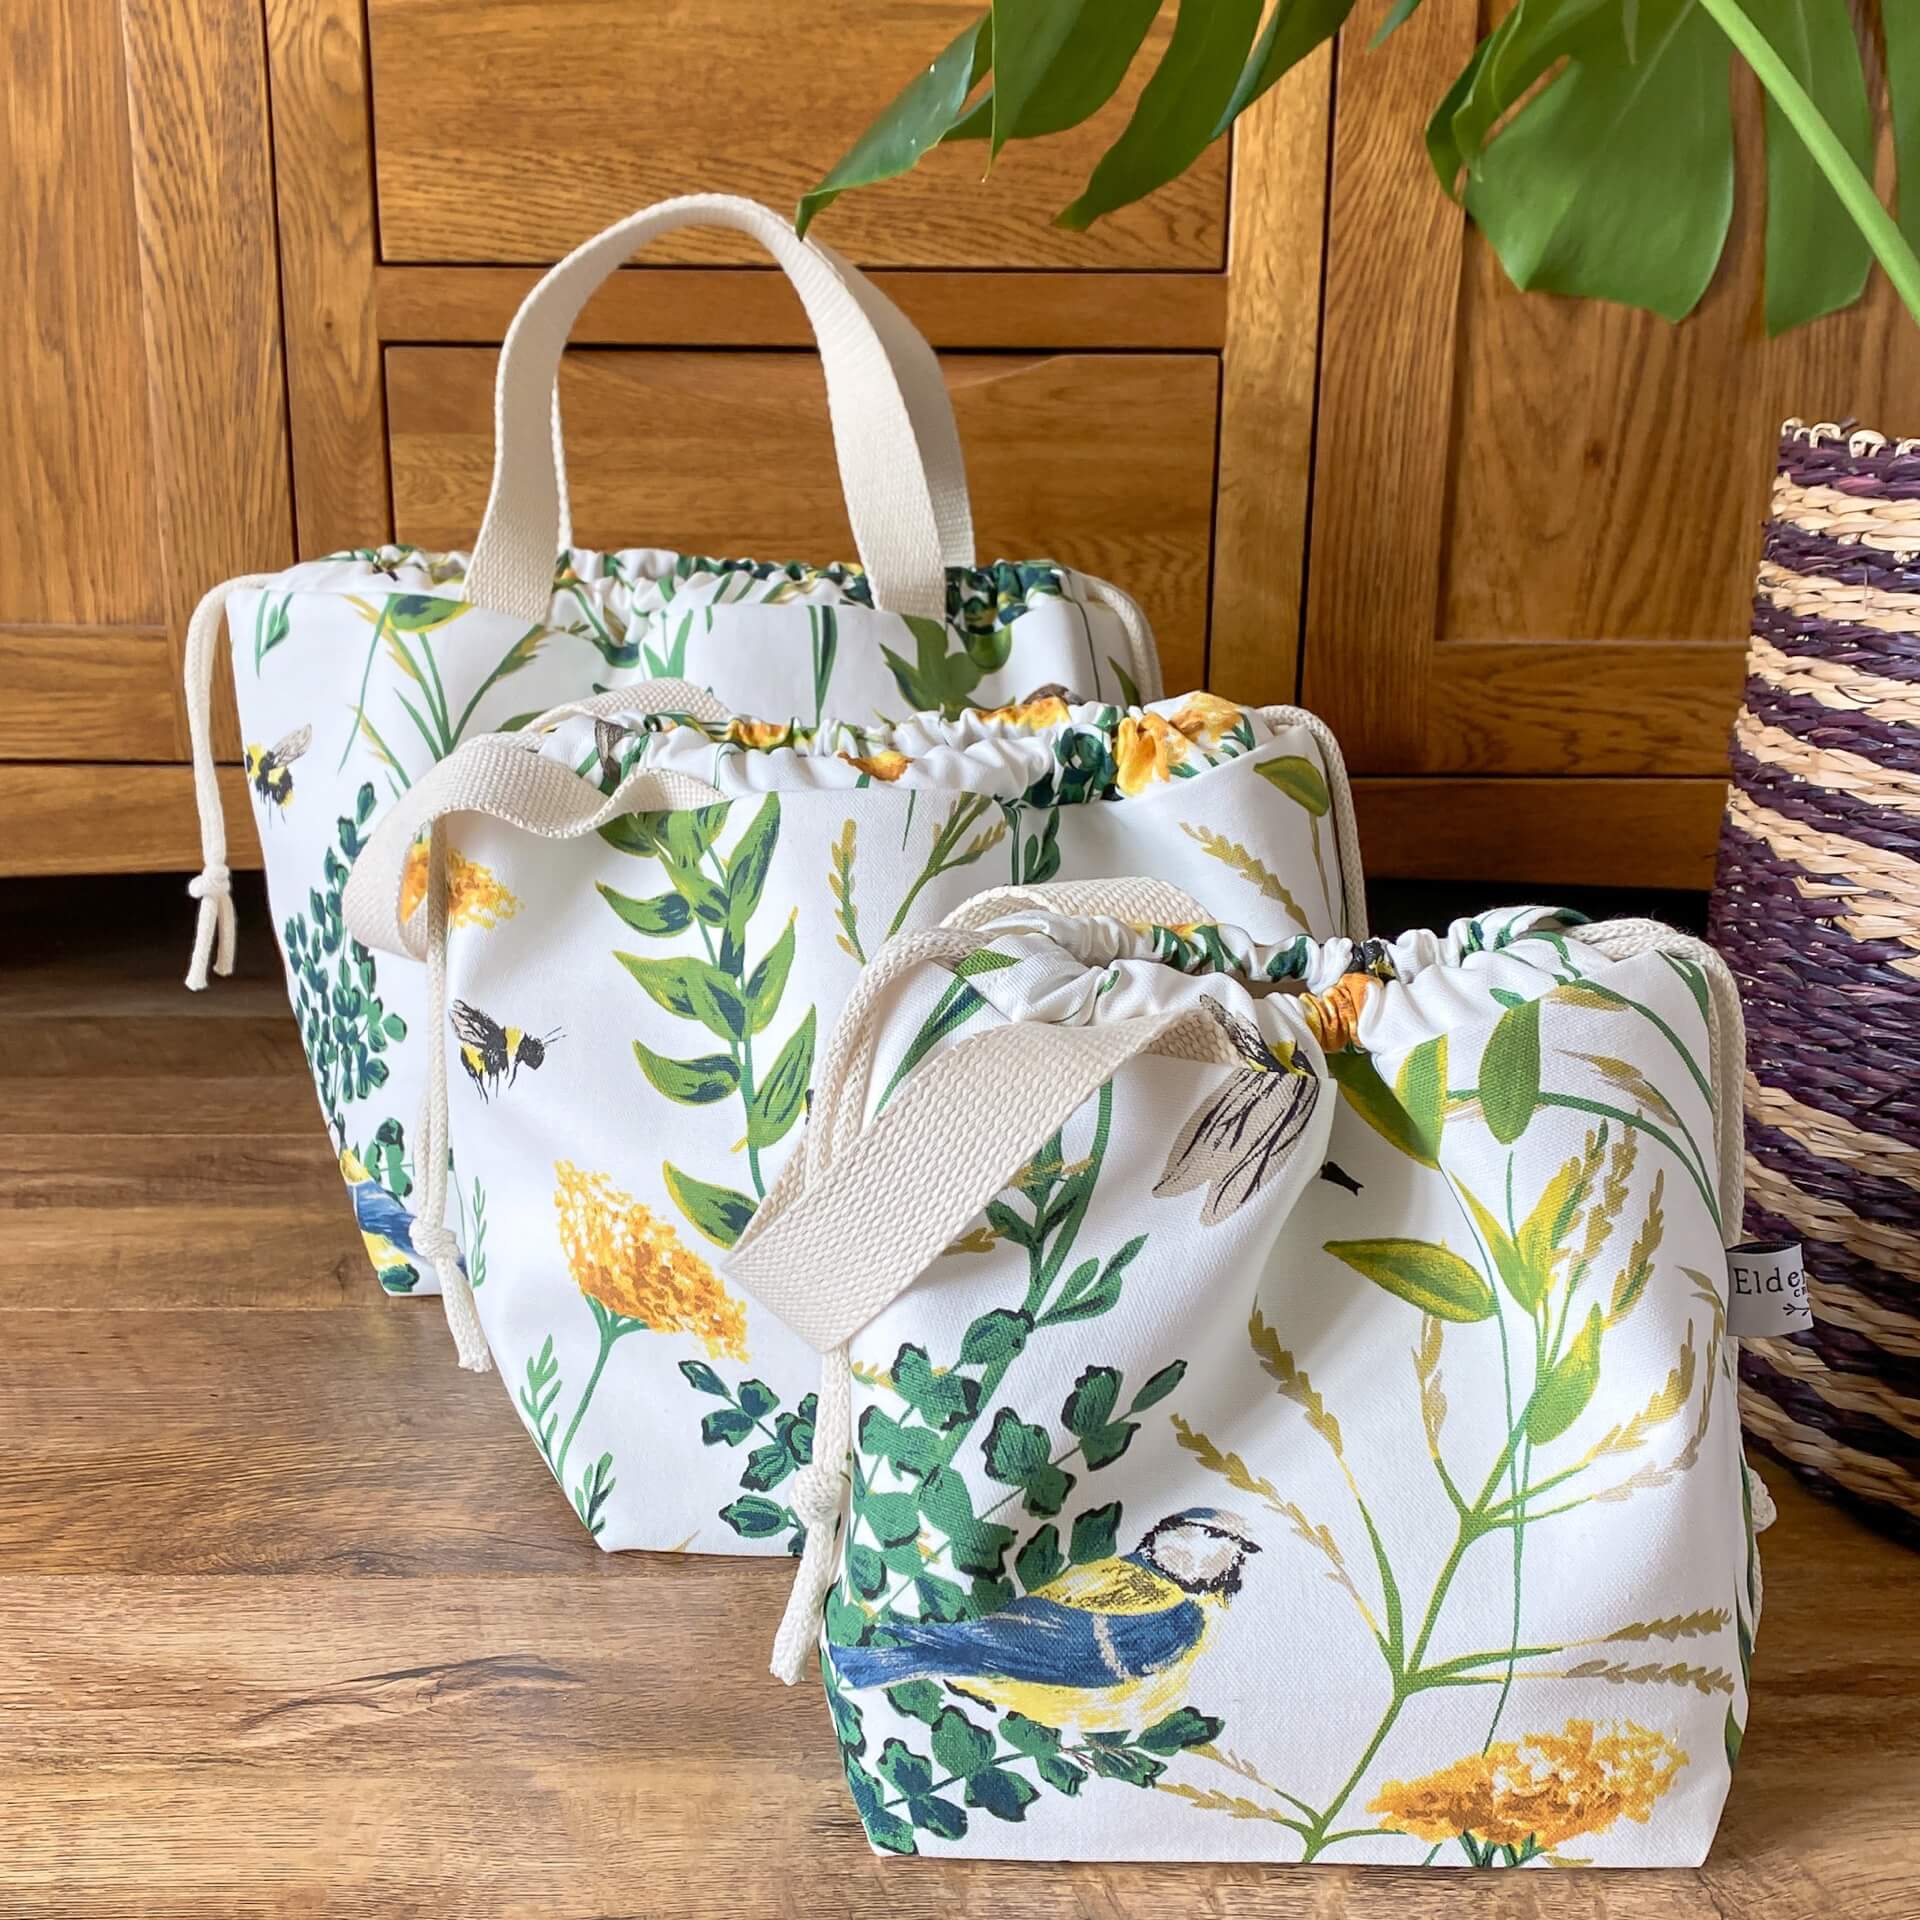 Three knitting project bags sit together with the smallest at the front and the largest at the back. The bags are made from a fabric that shows a summery scene with foliage in bloom, bees and birds. 